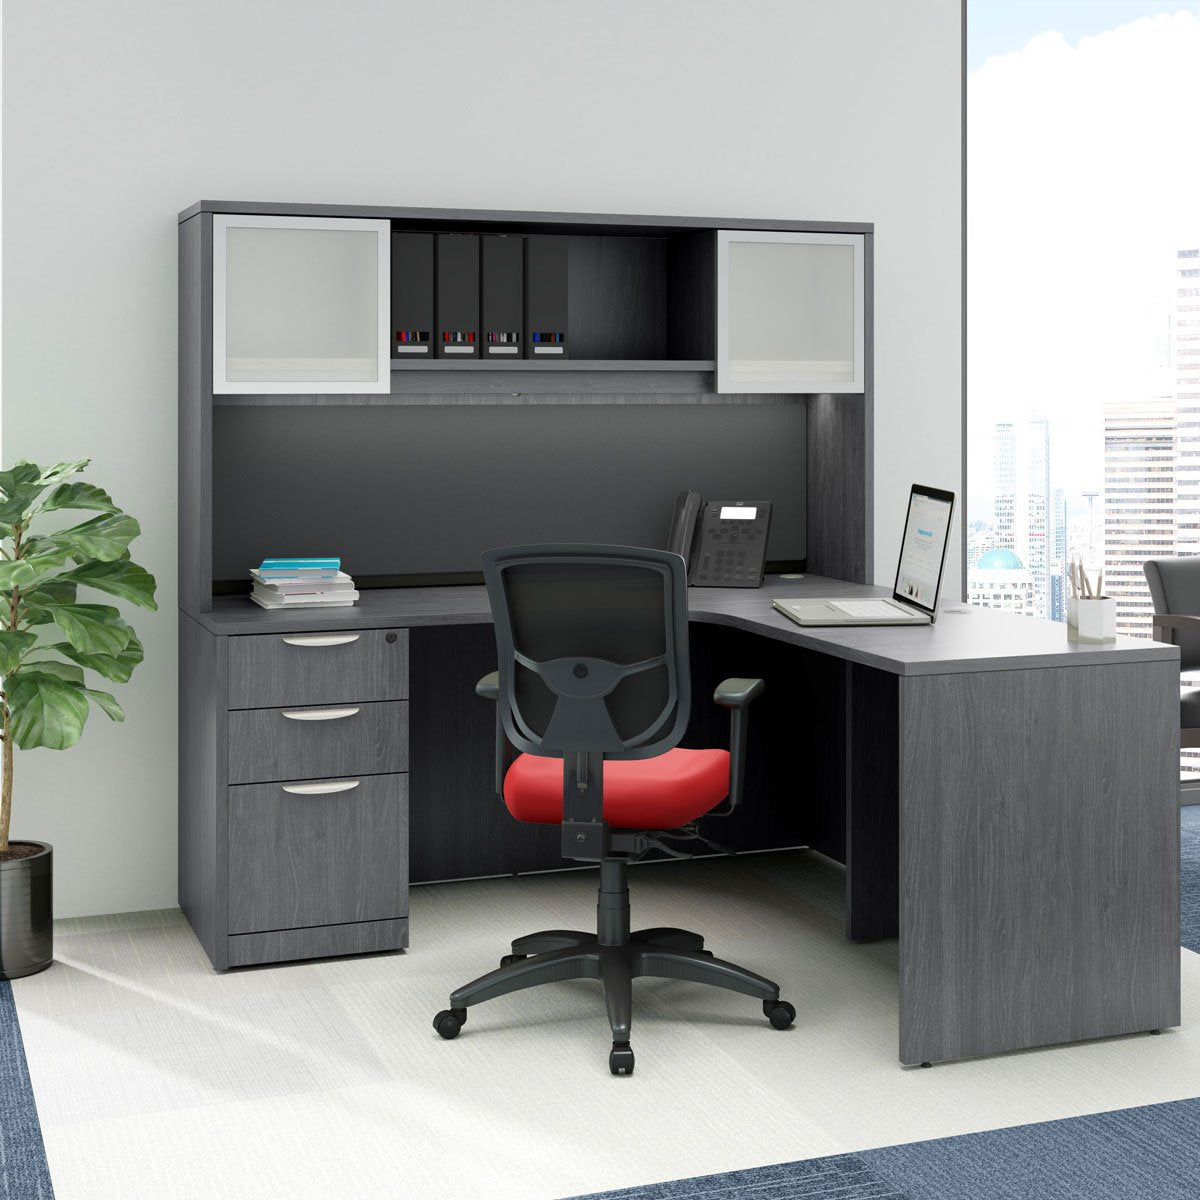 Workstation with overhead storage and filing